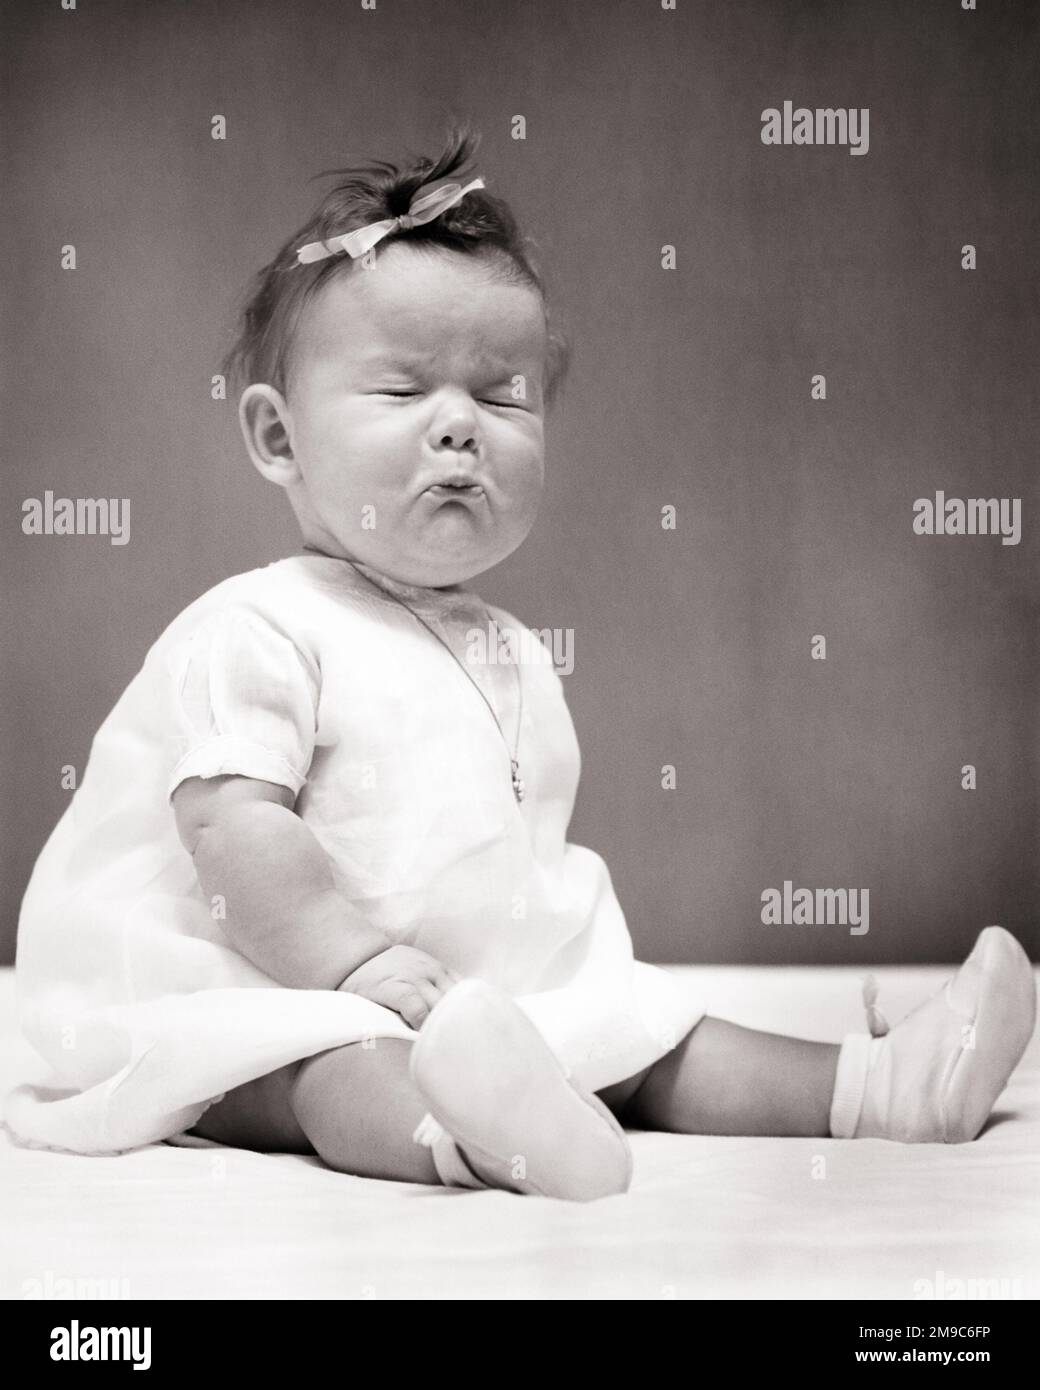 1940s BABY GIRL SITTING UP WEARING DRESS BOW IN HER HAIR A NECKLACE POUTING EYES CLOSED ABOUT TO CRY BAD TASTE OR SOUR TASTE - b17869 HAR001 HARS FACIAL ANGER FEAR COMMUNICATION COMIC INFANT WORRY LIFESTYLE FEMALES STUDIO SHOT MOODY TEARS HOME LIFE COPY SPACE FULL-LENGTH CRY EXPRESSIONS TROUBLED B&W CONCERNED SADNESS HUMOROUS WEEPING POUTING BOOTIES COMICAL TASTE BAWLING UP MOOD SOBBING FUNNY FACE GLUM COMEDY OR SCRUNCHING BAD TASTE JUVENILES MISERABLE SCRUNCHED SOUR BABY GIRL BLACK AND WHITE CAUCASIAN ETHNICITY EYES CLOSED HAR001 OLD FASHIONED SITTING UP Stock Photo